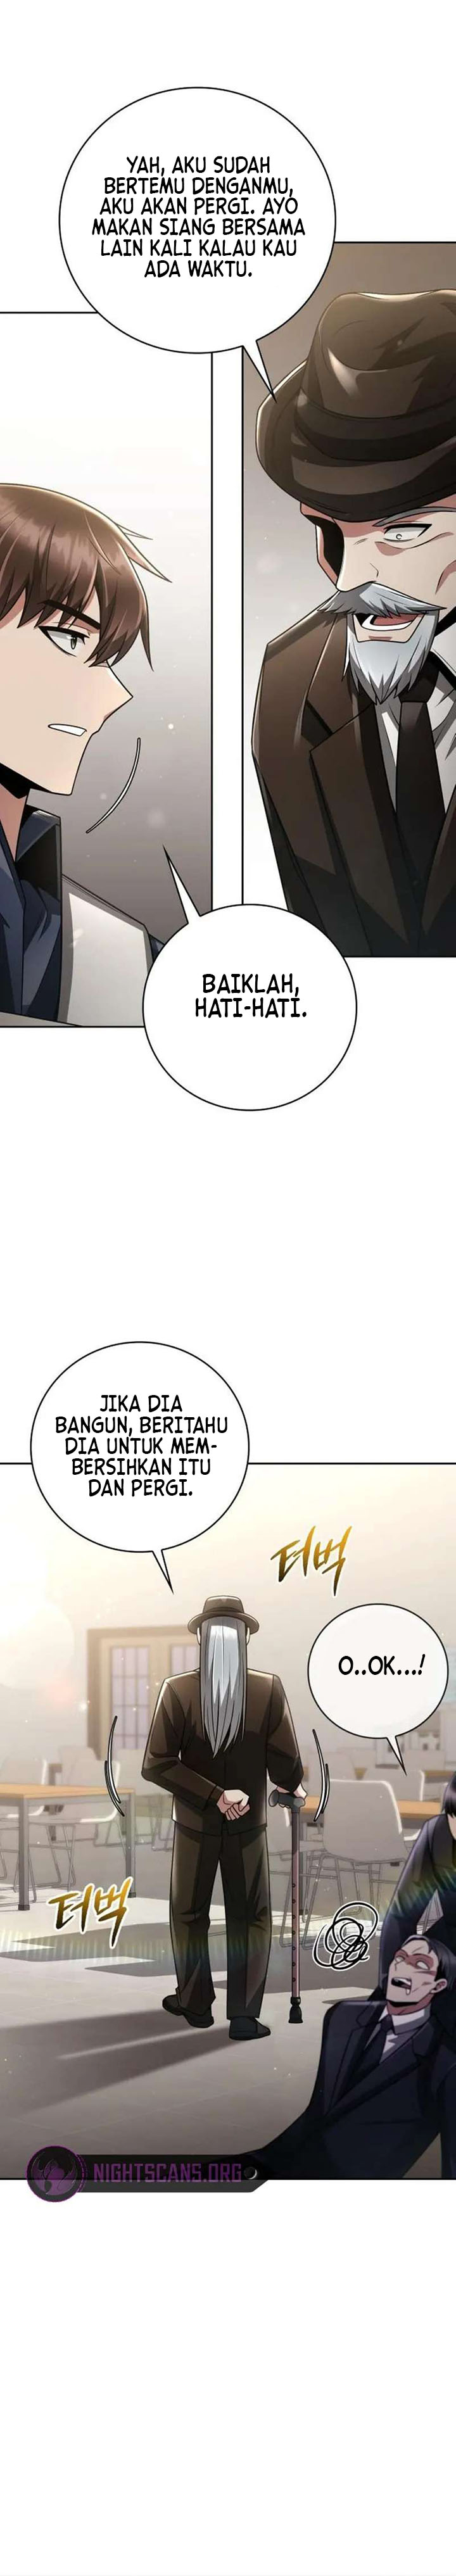 Dilarang COPAS - situs resmi www.mangacanblog.com - Komik clever cleaning life of the returned genius hunter 042 - chapter 42 43 Indonesia clever cleaning life of the returned genius hunter 042 - chapter 42 Terbaru 27|Baca Manga Komik Indonesia|Mangacan